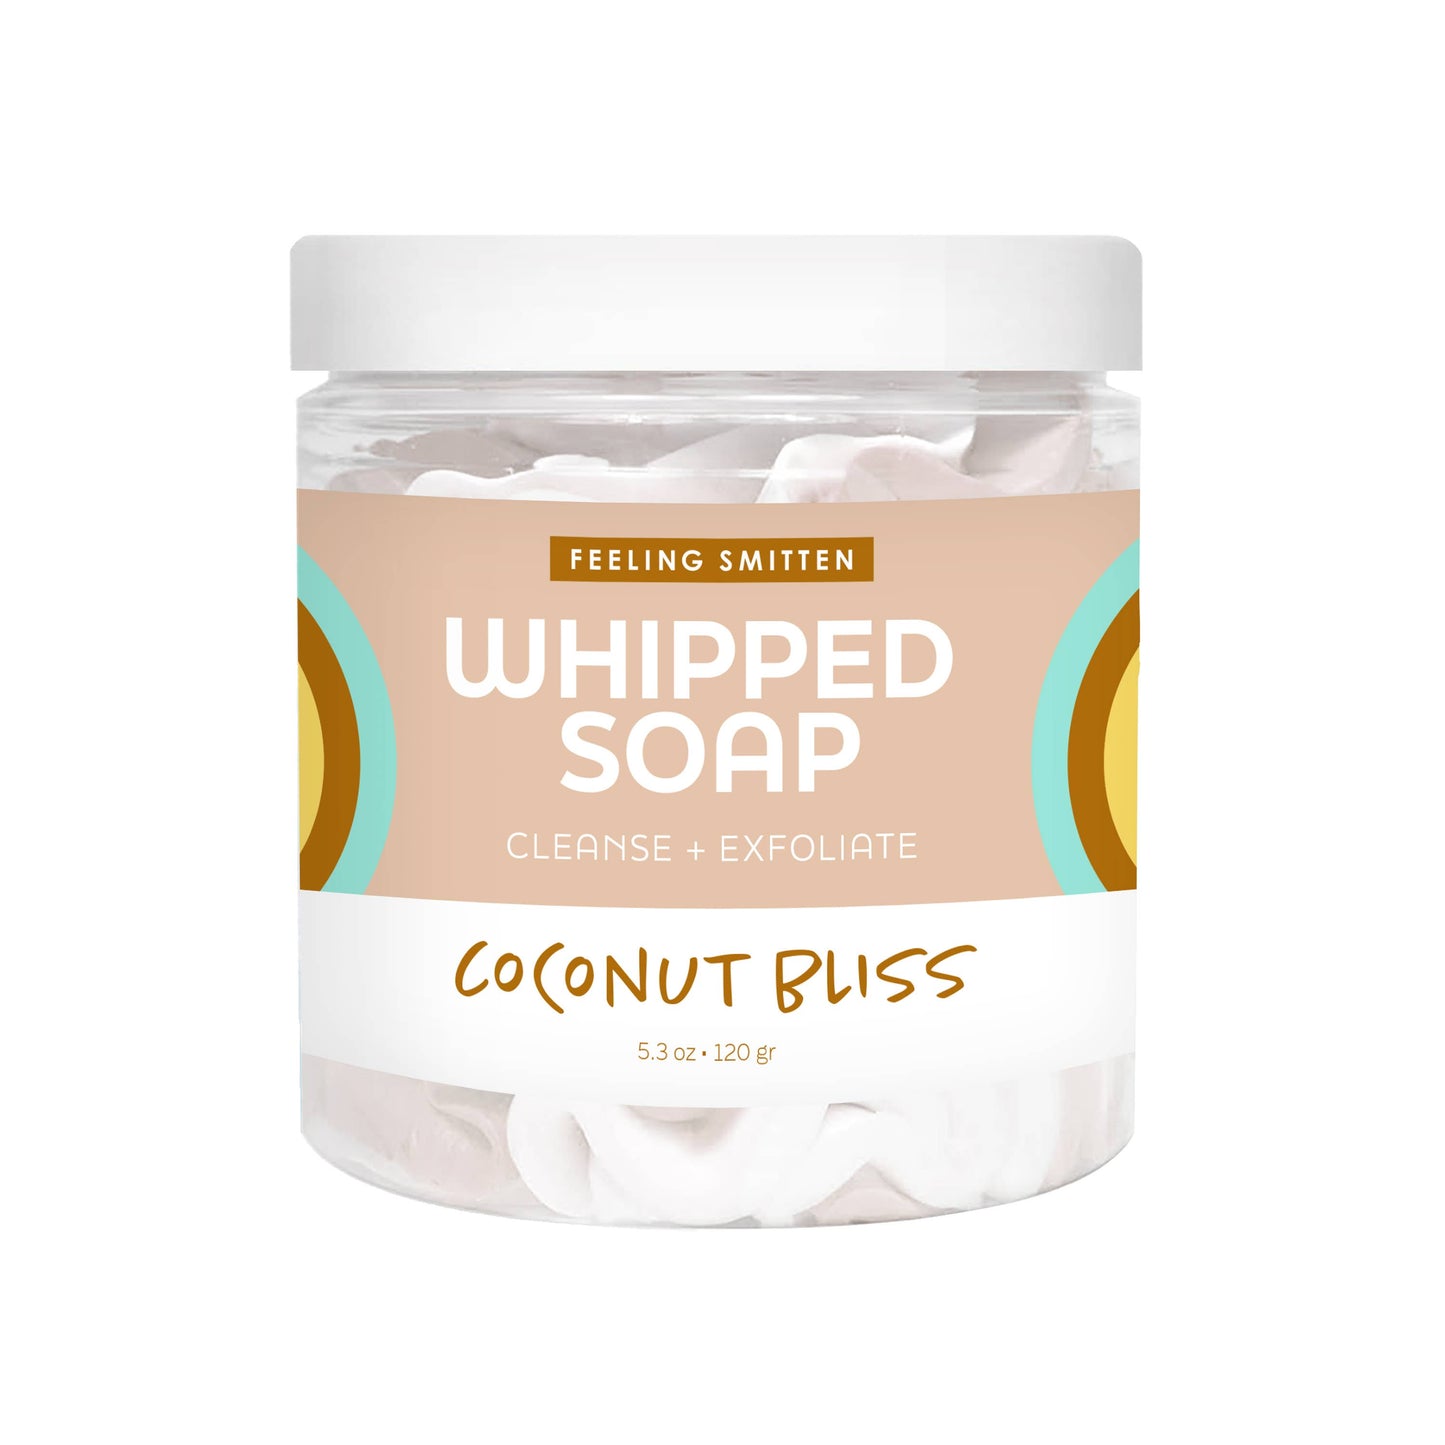 Whipped Soap: Coconut Bliss